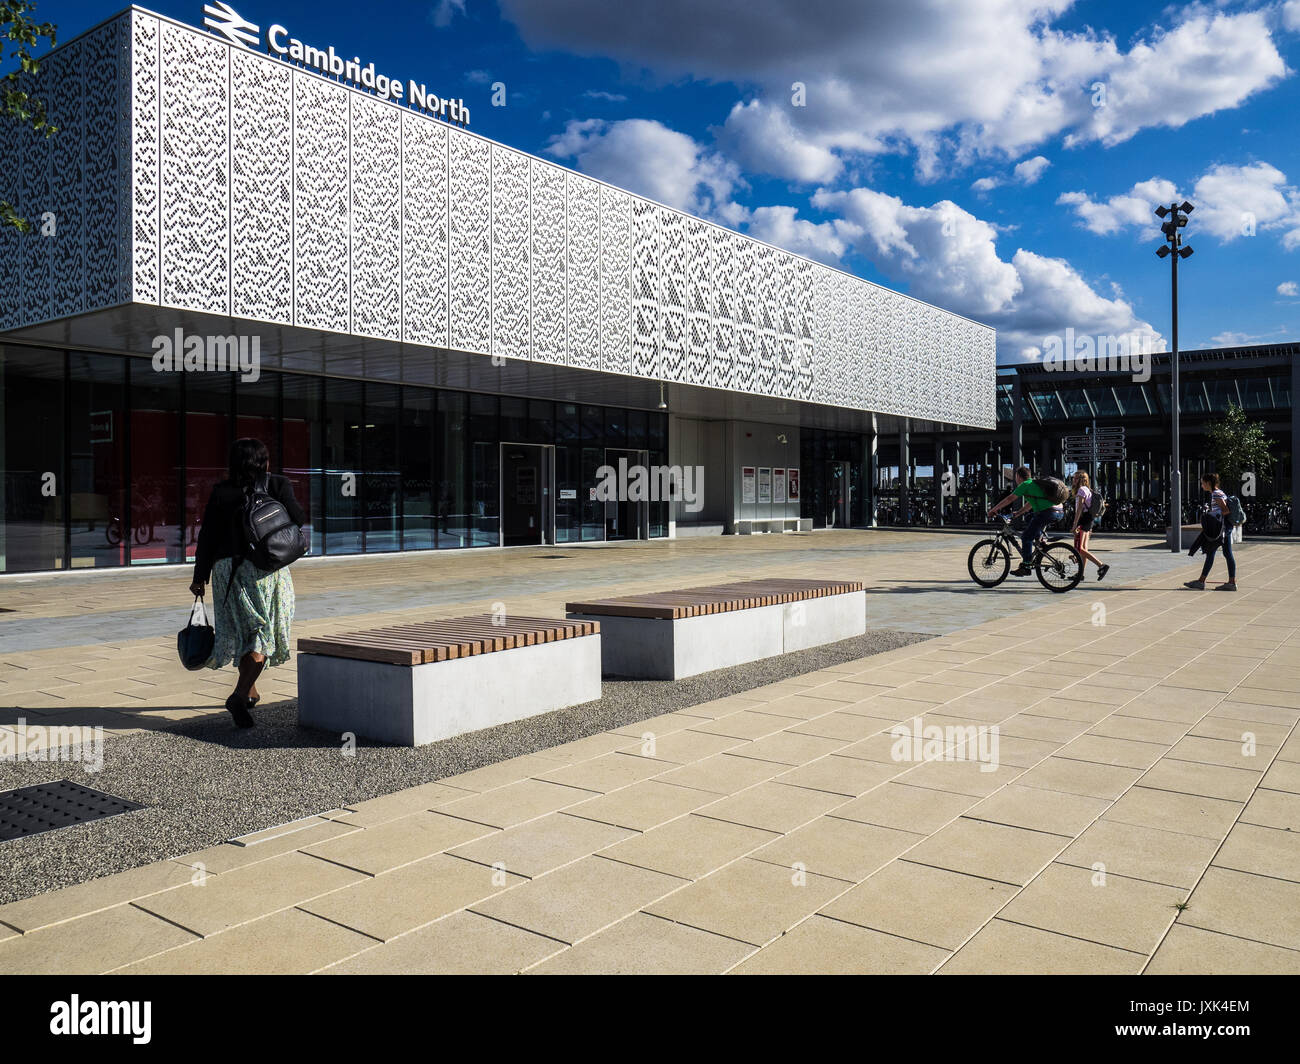 Cambridge North Train Station - opened 2017 serving North Cambridge and the Science Park. Design based on Conway's Game of Life.  Architects Atkins. Stock Photo